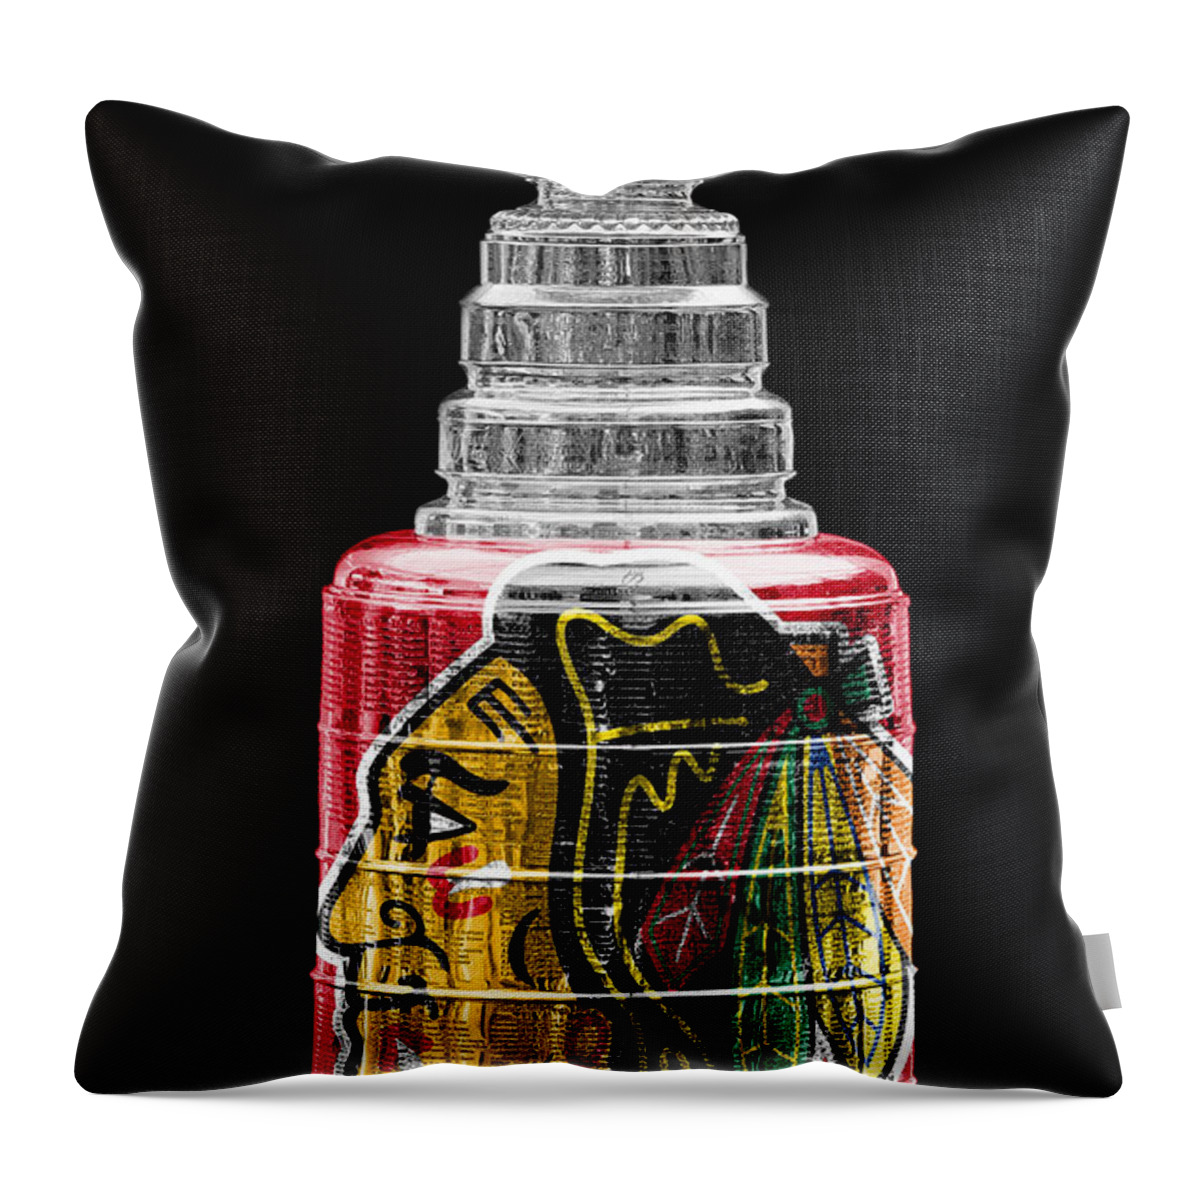 Hockey Throw Pillow featuring the photograph Stanley Cup 6 by Andrew Fare